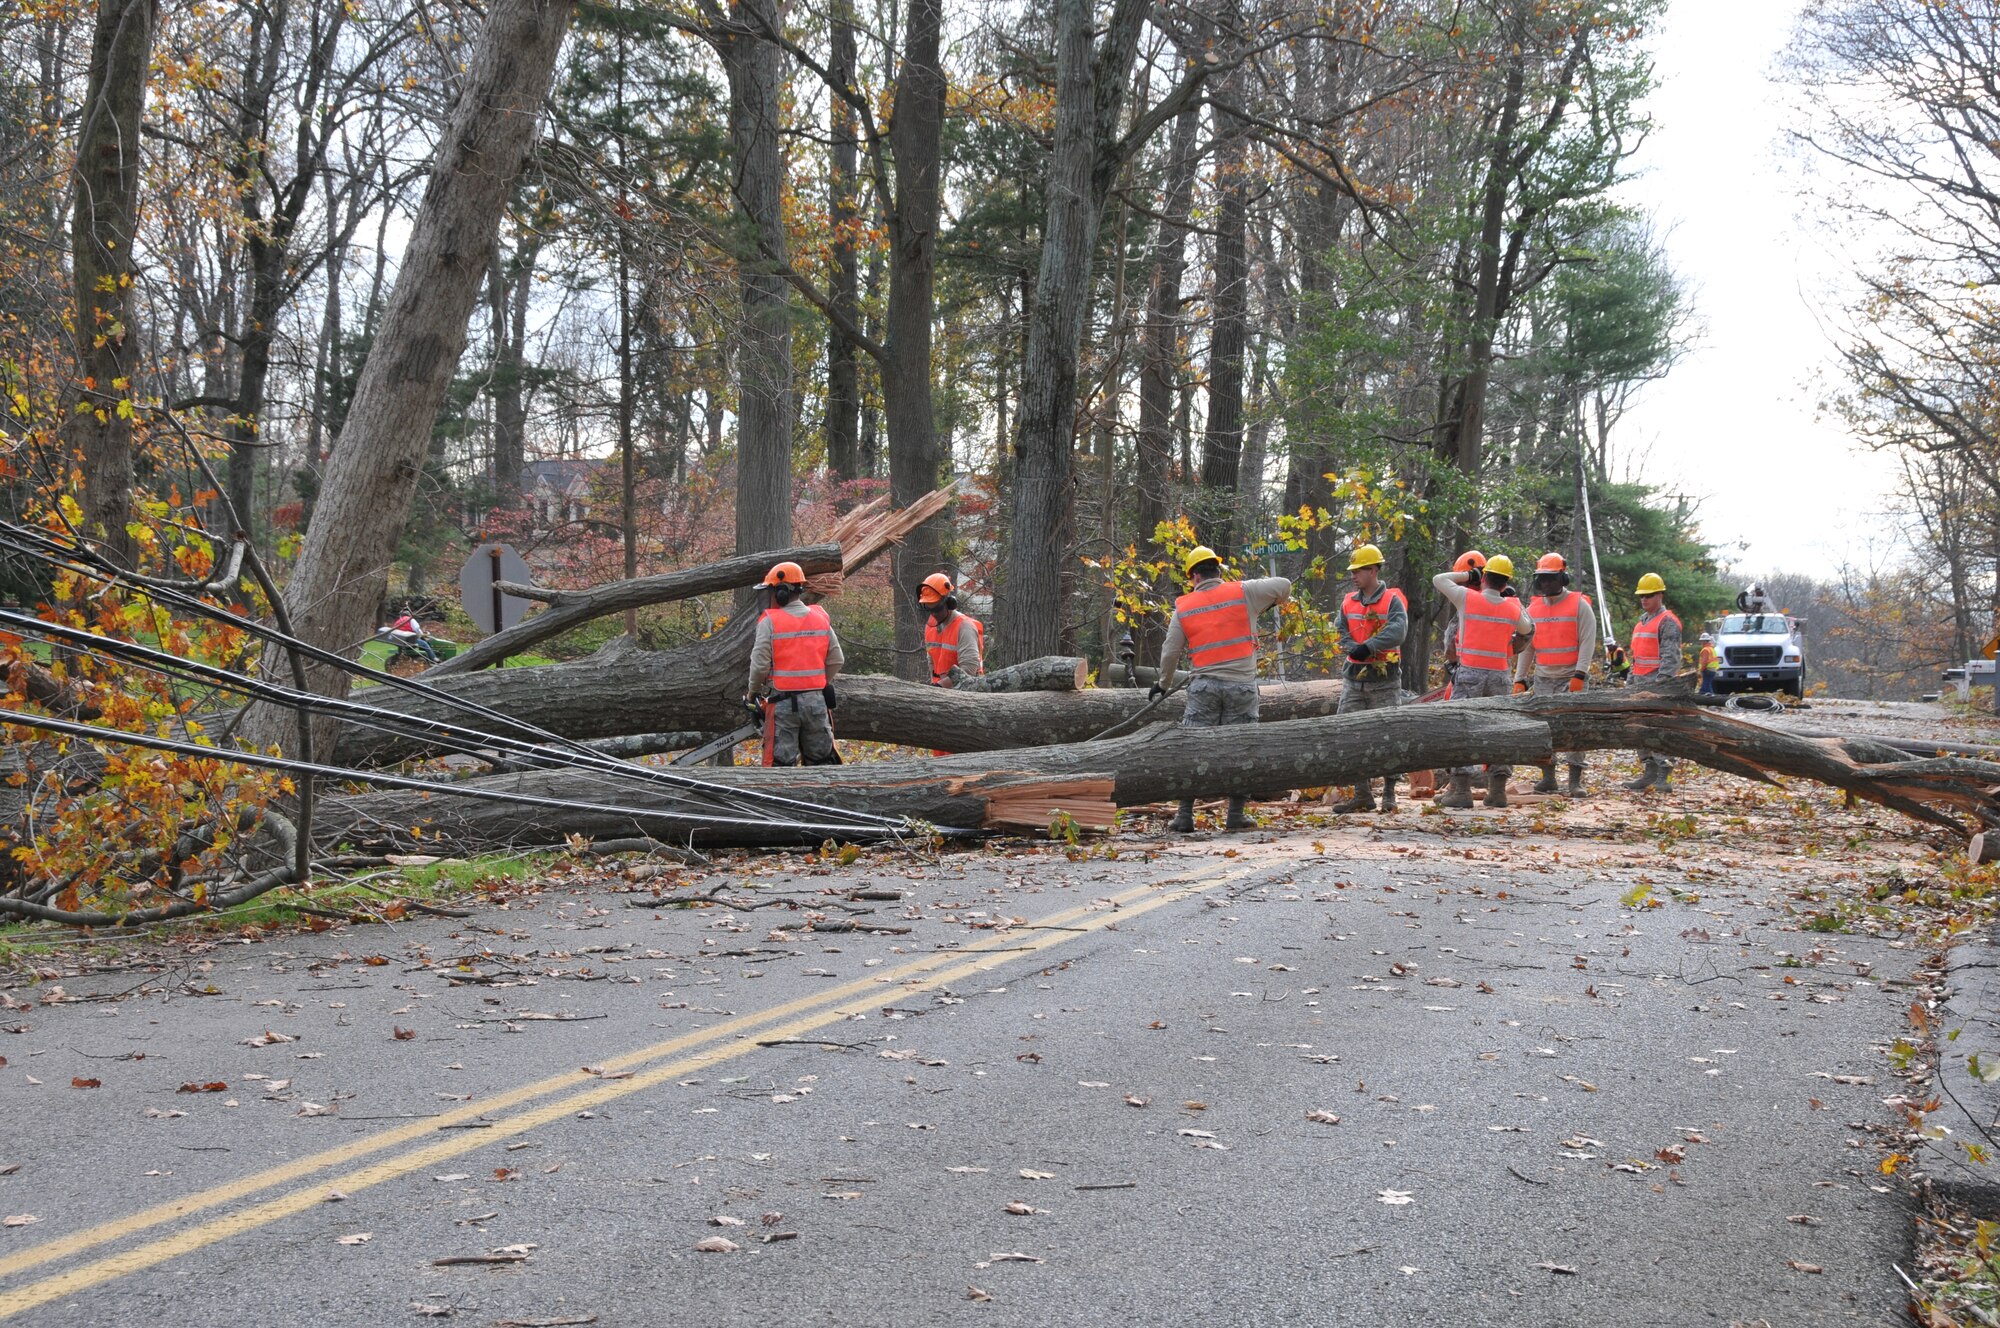 Members of the 103rd Civil Engineer Squadron chainsaw team cut up a fallen tree to help clear the road and facilitate power restoration in a Southern Connecticut town Nov. 1, 2012.The Airmen are part of the Connecticut National Guard’s emergency response in the wake of the massive destruction caused by Super Storm Sandy. (U.S. Air Force photo by Master Sgt. Erin McNamara)